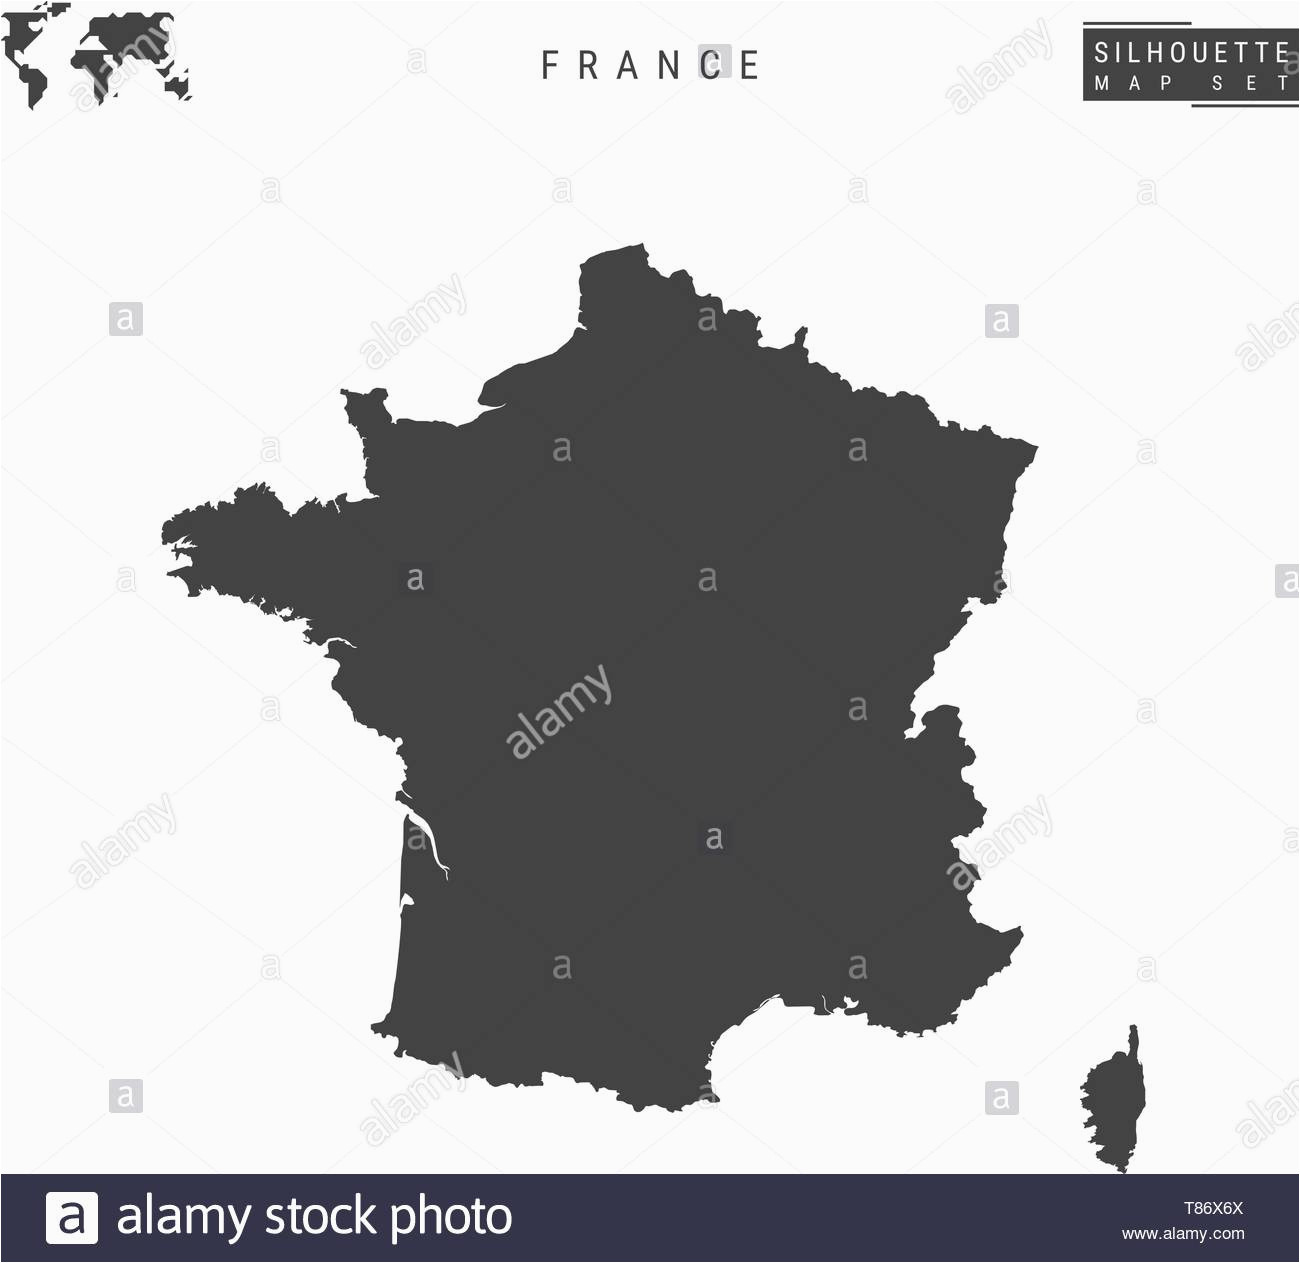 outline map france stock photos outline map france stock images